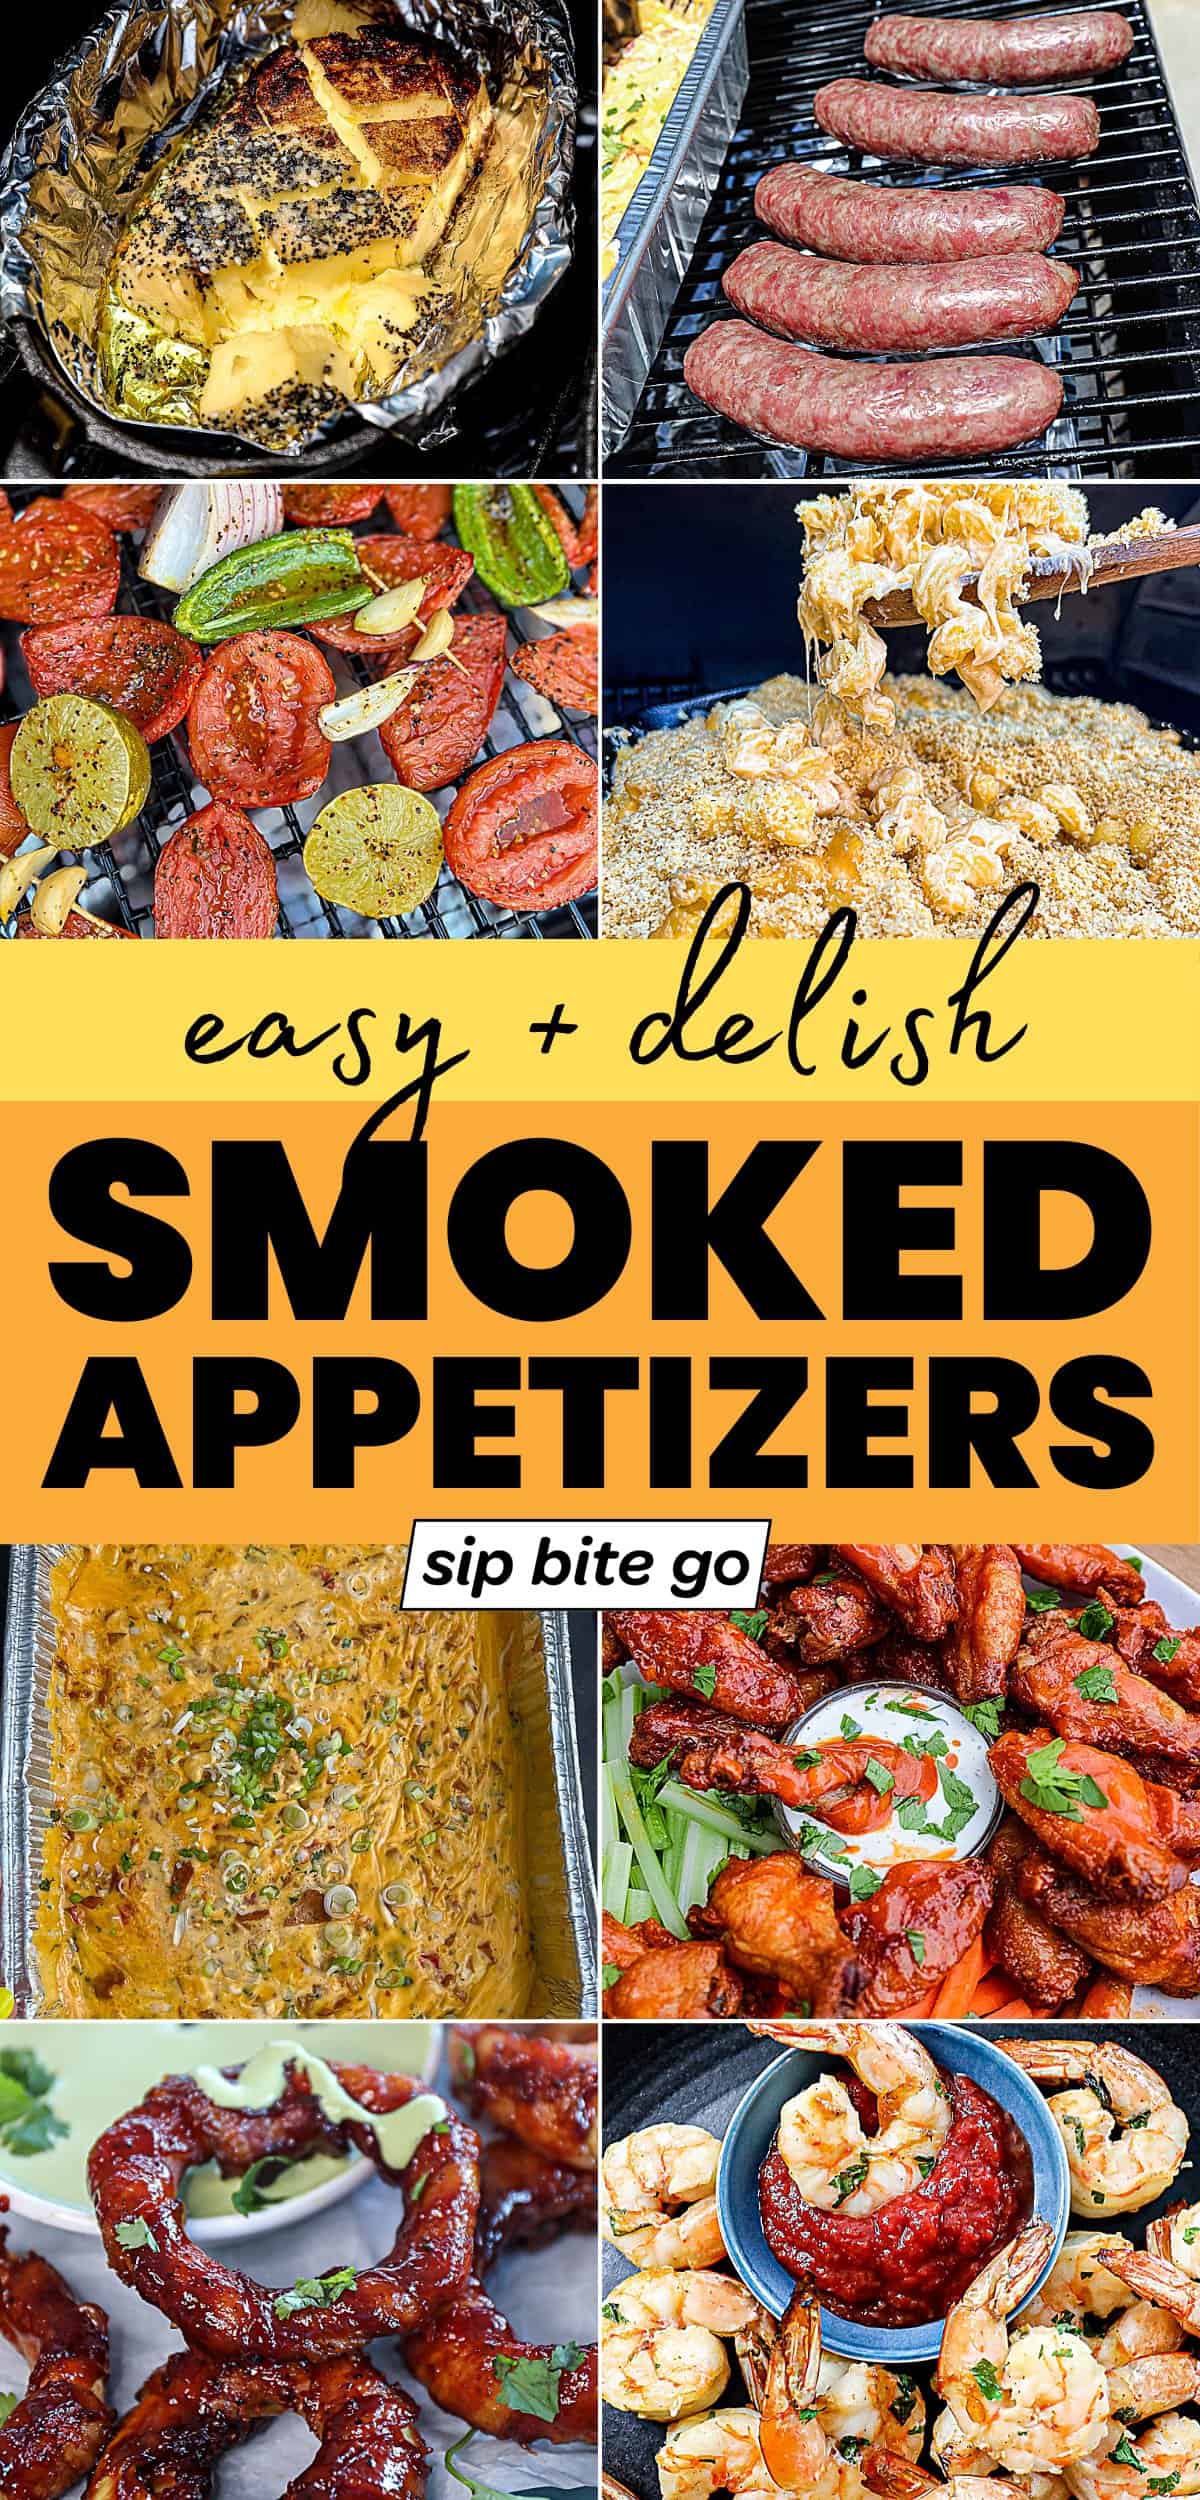 Traeger Pellet Grill Smoked Appetizers with text overlay and Sip Bite Go logo